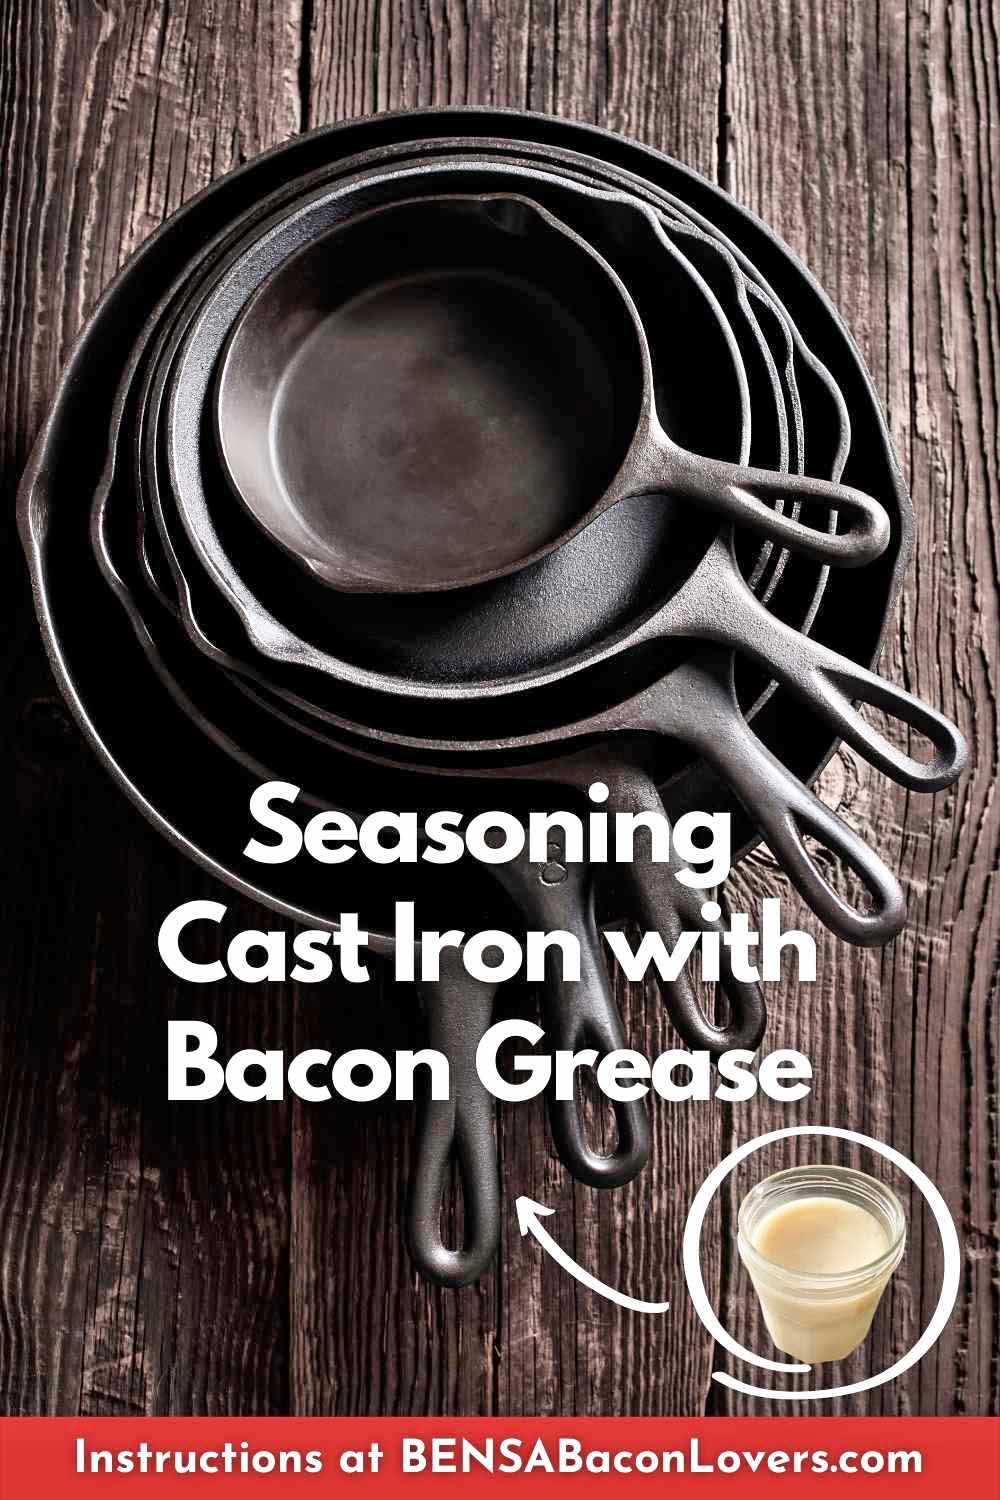 Six stacked cast iron skillets and a jar of rendered bacon grease.